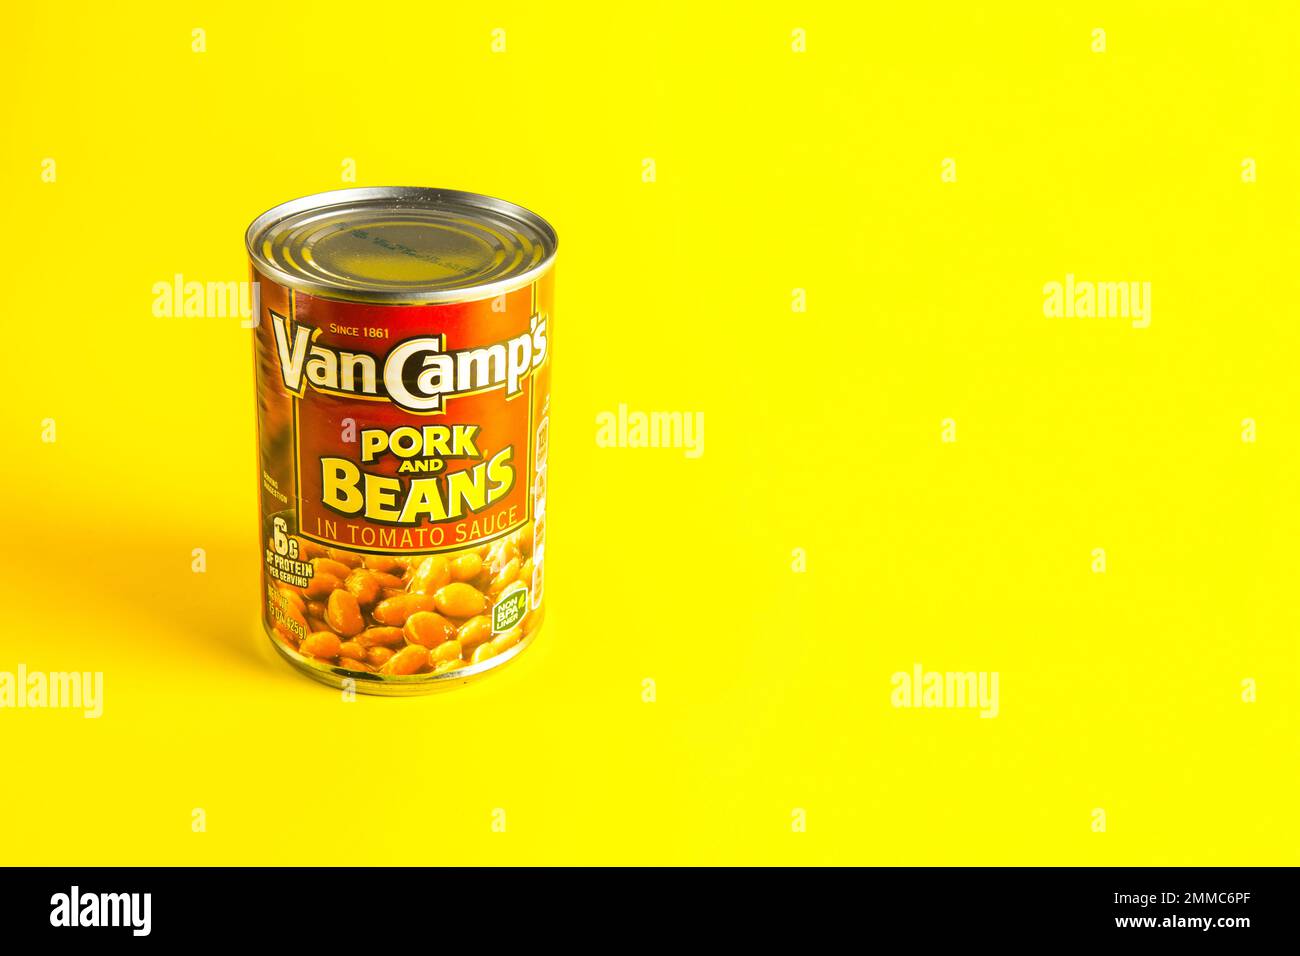 tin of Van Camps Pork and Beans Baked Beans stand out  on a yellow background Stock Photo